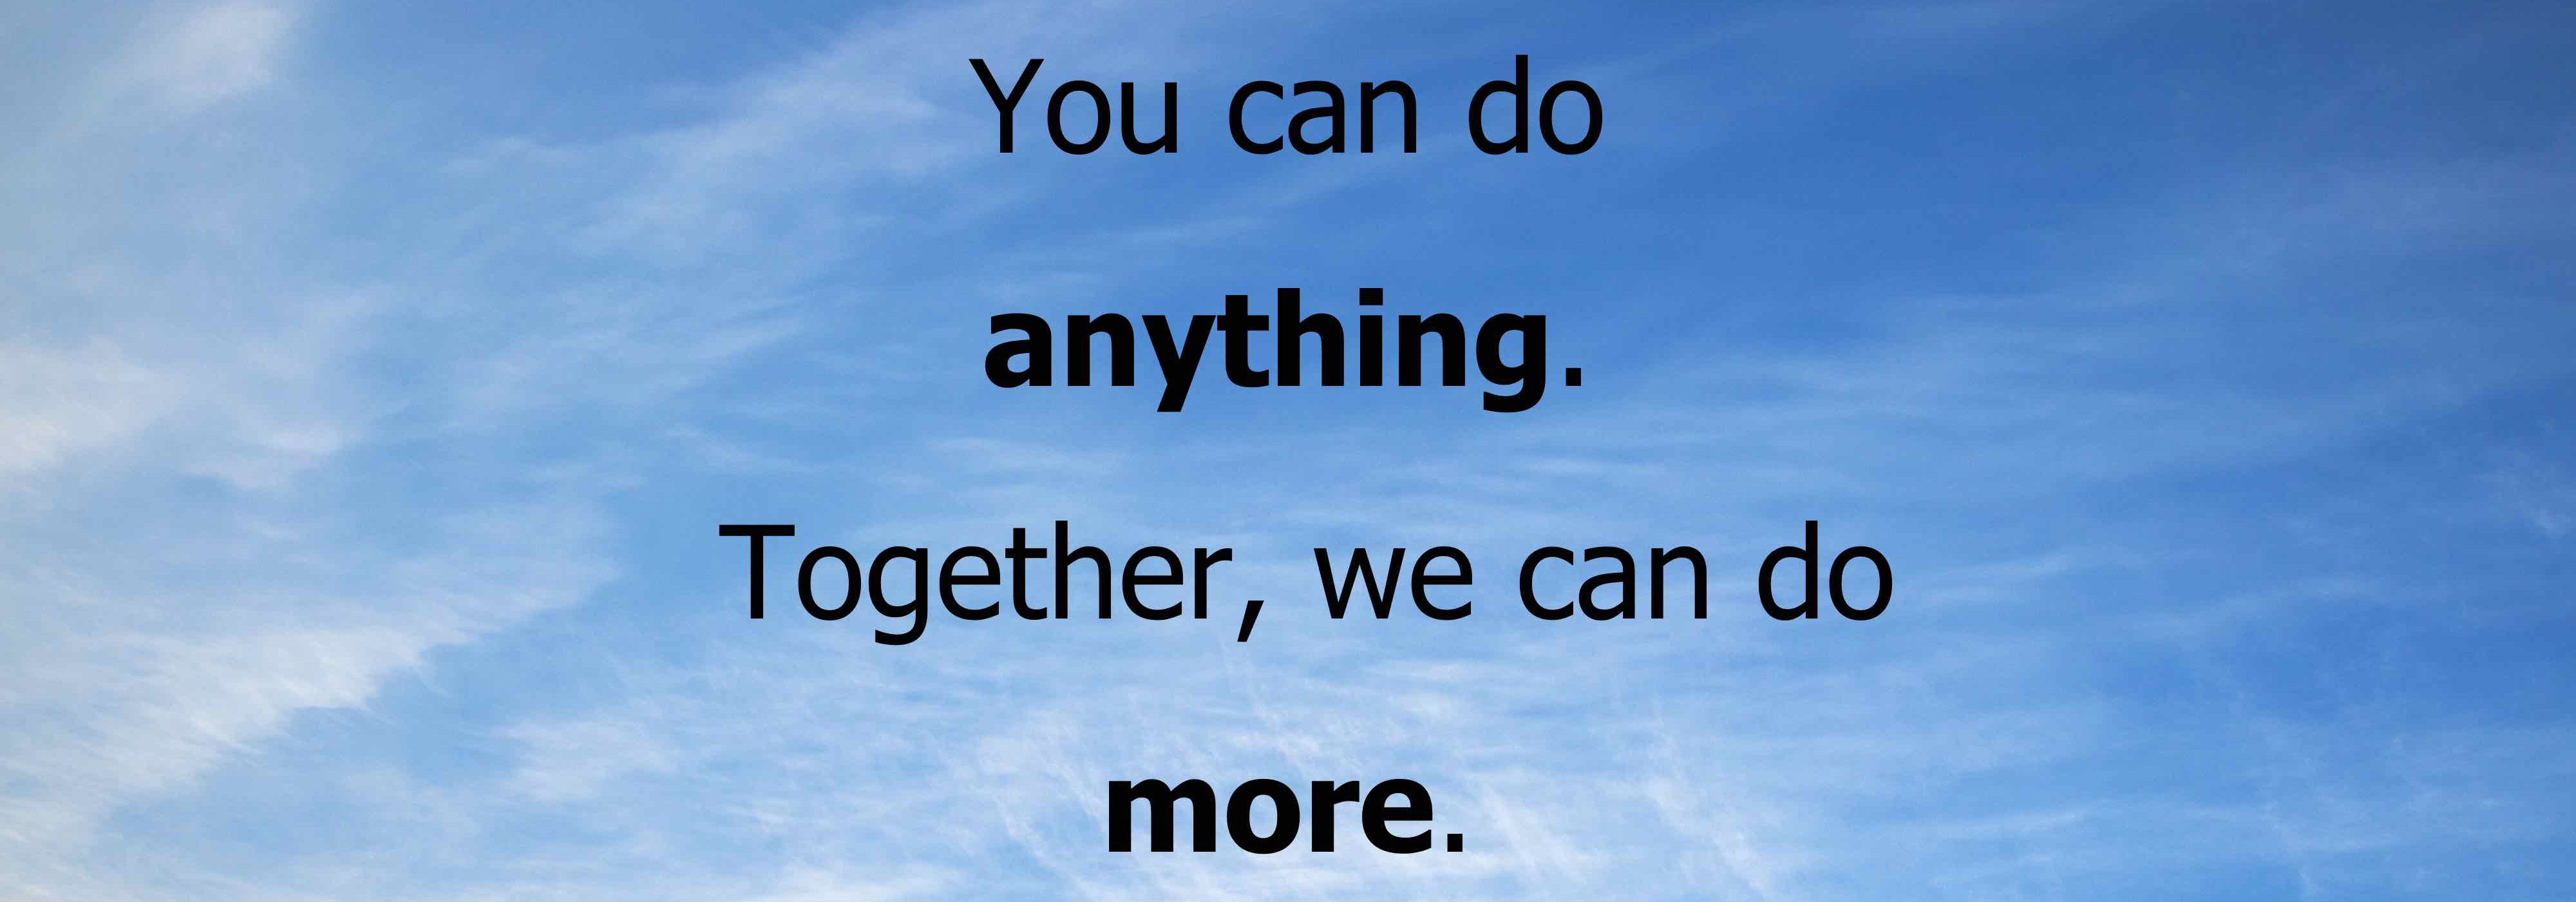 You can do anything. Together, we can do more.